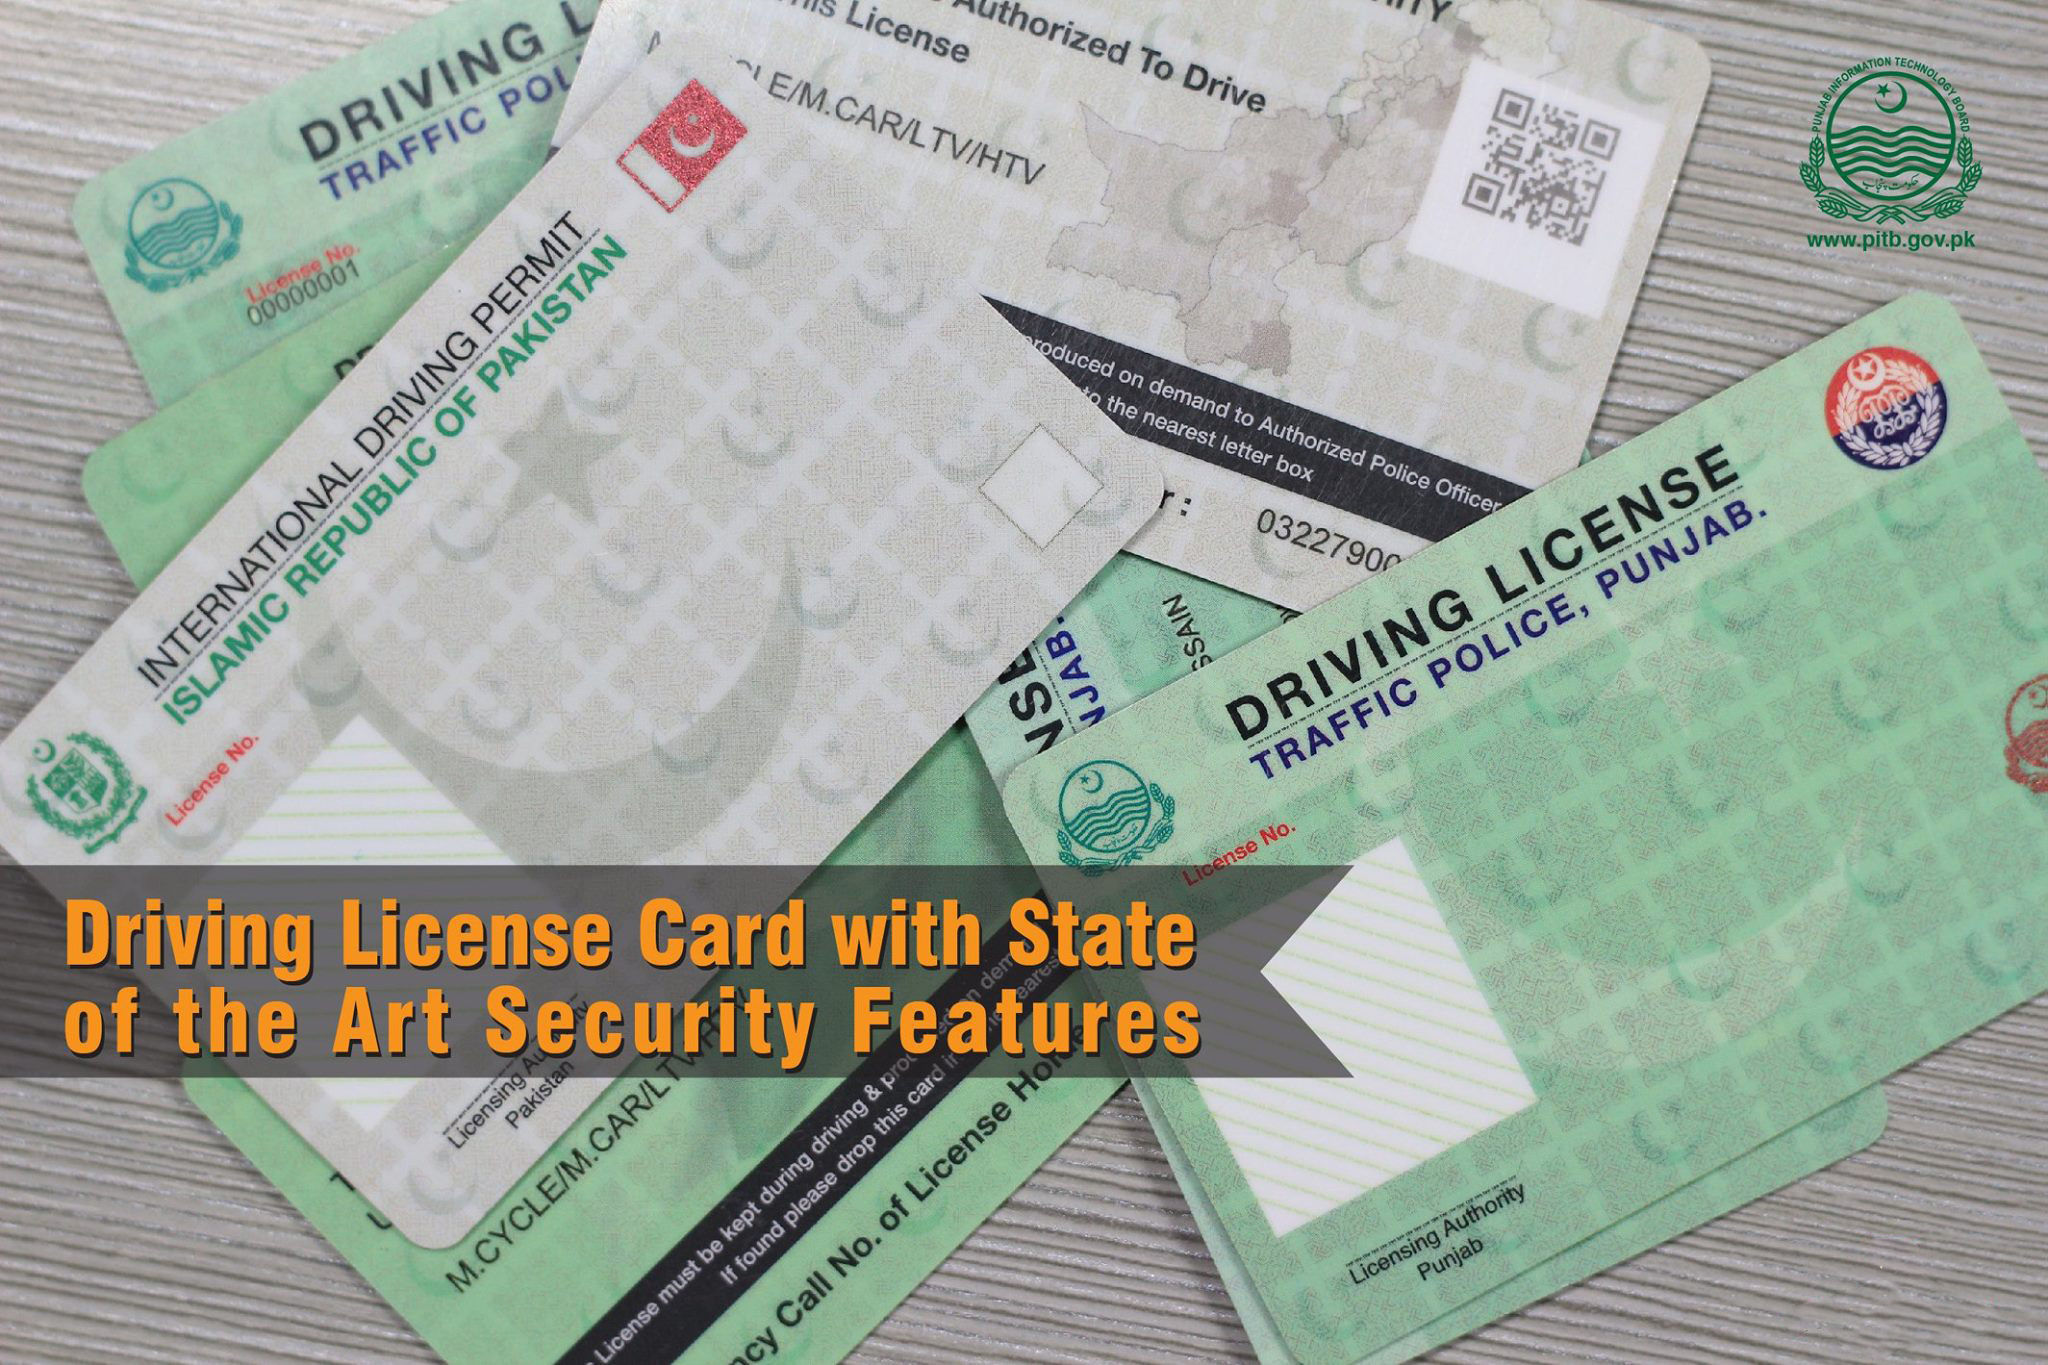 Automation of driving licenses